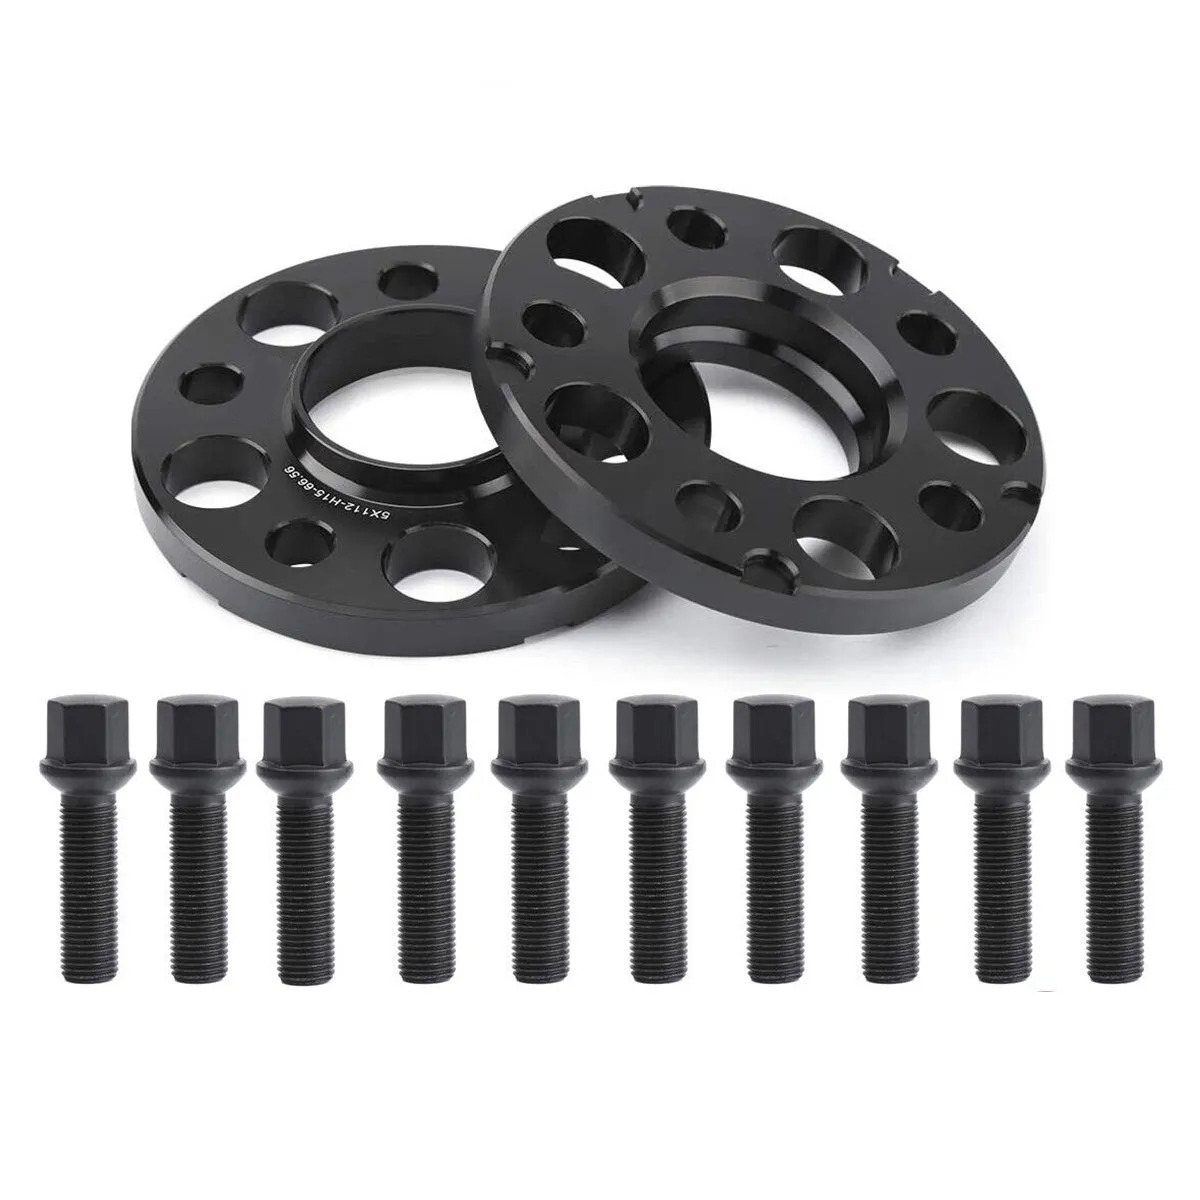 2pc 15mm Hub centric Wheel Spacers for Audi 2009-2018 A4/S4 B8 B9 RS4 RS6 A5 A6